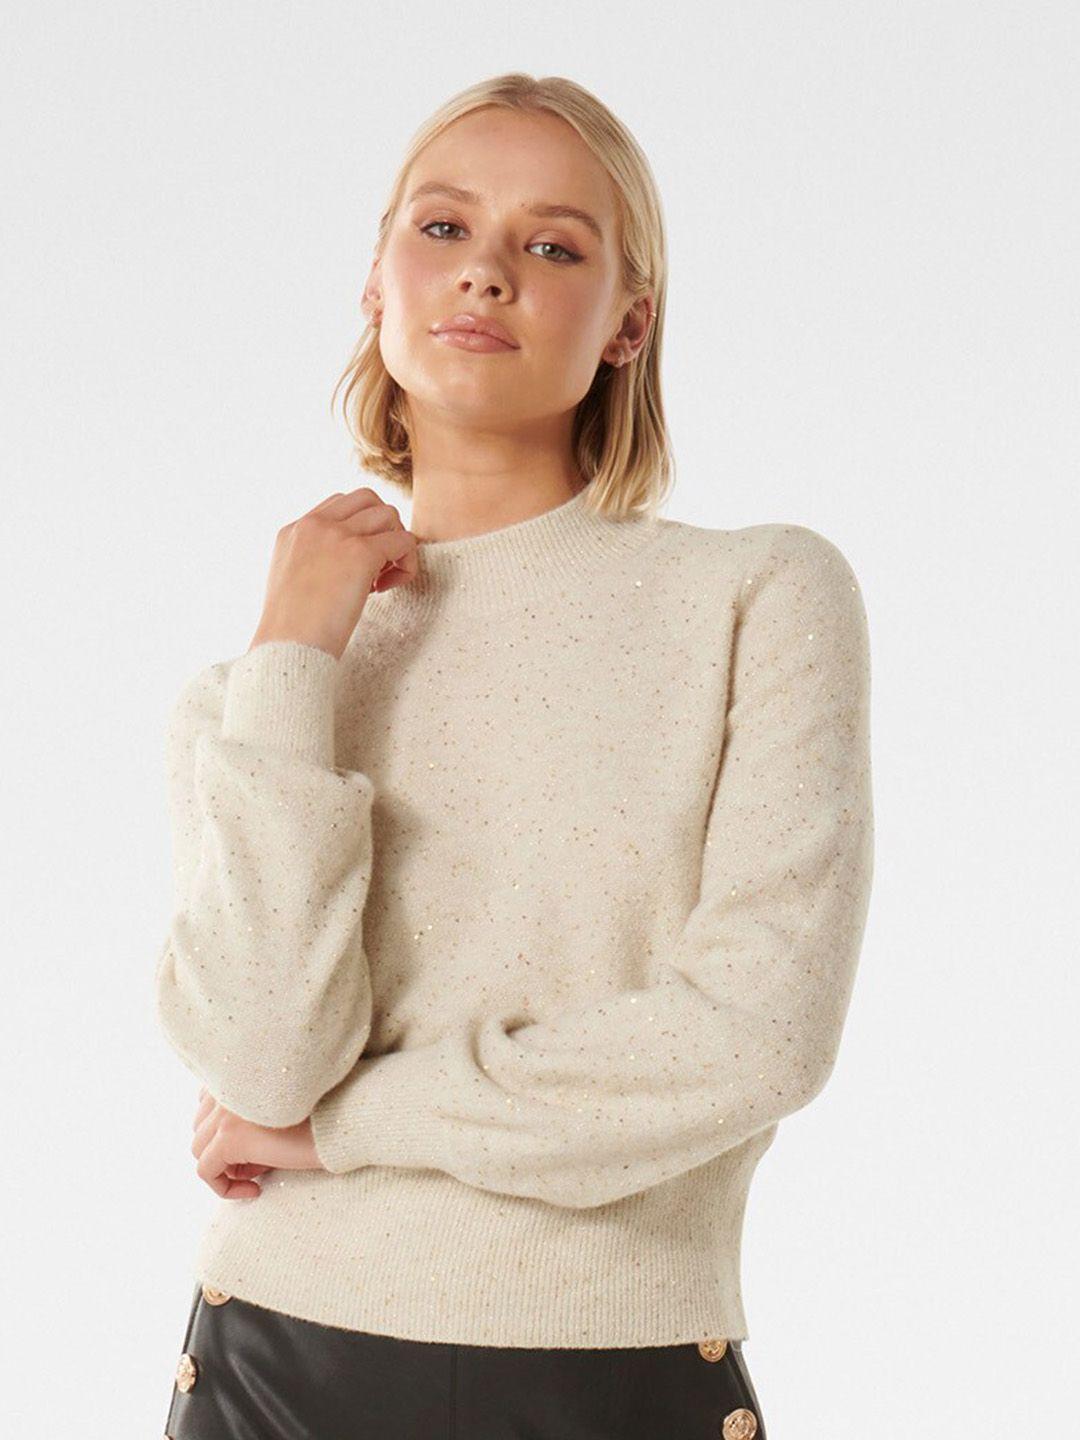 forever-new-round-neck-long-sleeves-embellished-pullover-jumper-sweater